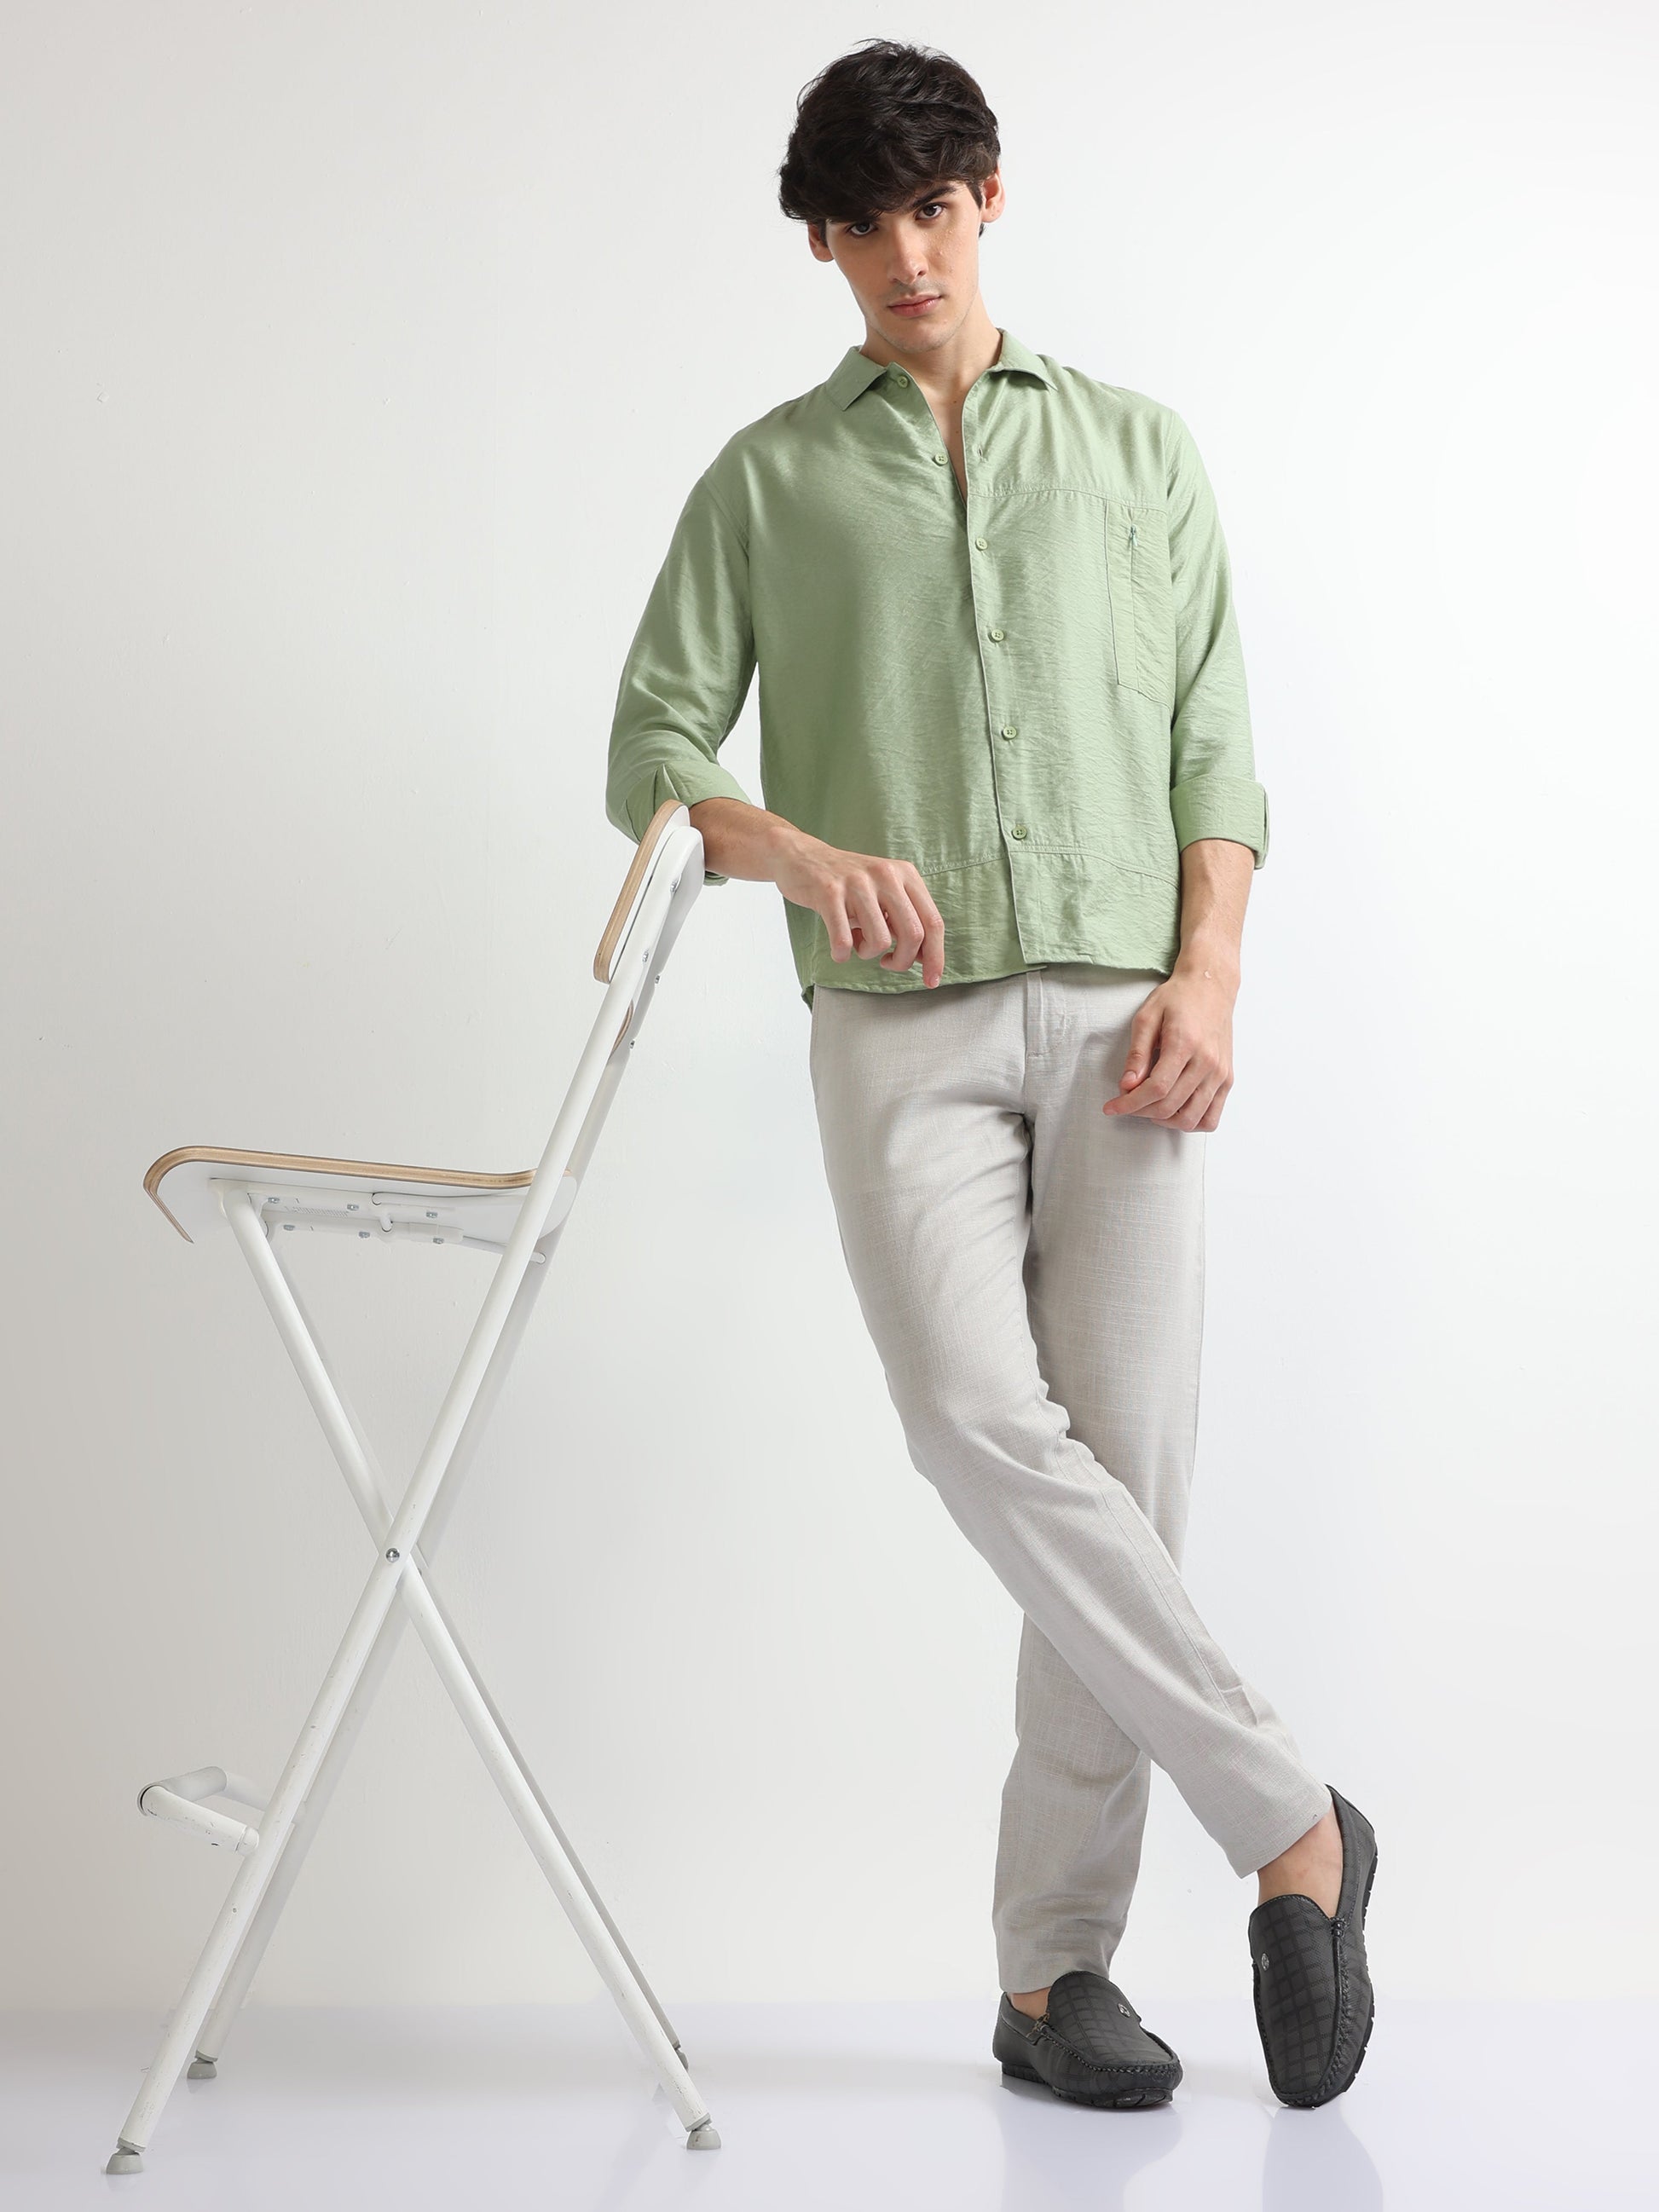 Buy Imported Fabric Solid Crushed Shirt Online.